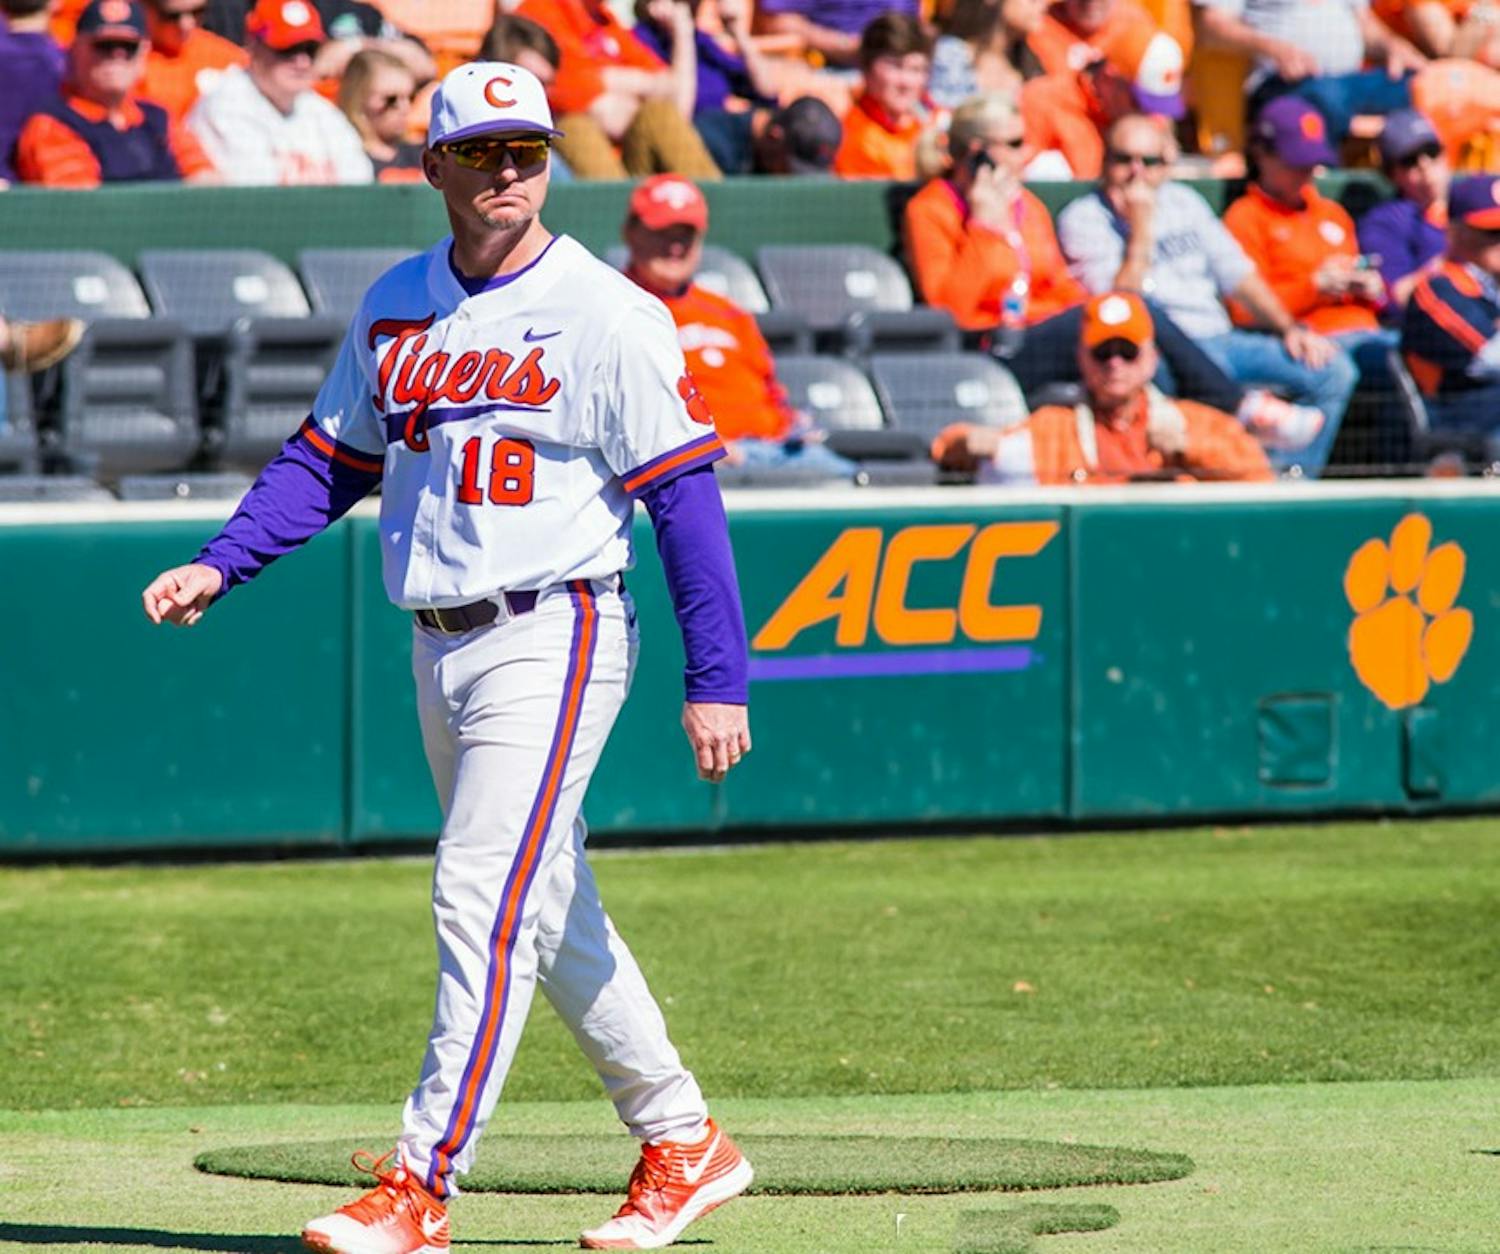 Former Clemson head baseball coach Monte Lee walks down baseball field during a Clemson game on Feb. 28, 2016. According to multiple reports, Lee will replace assistant baseball coach Chad Caillet, who will retire.&nbsp;